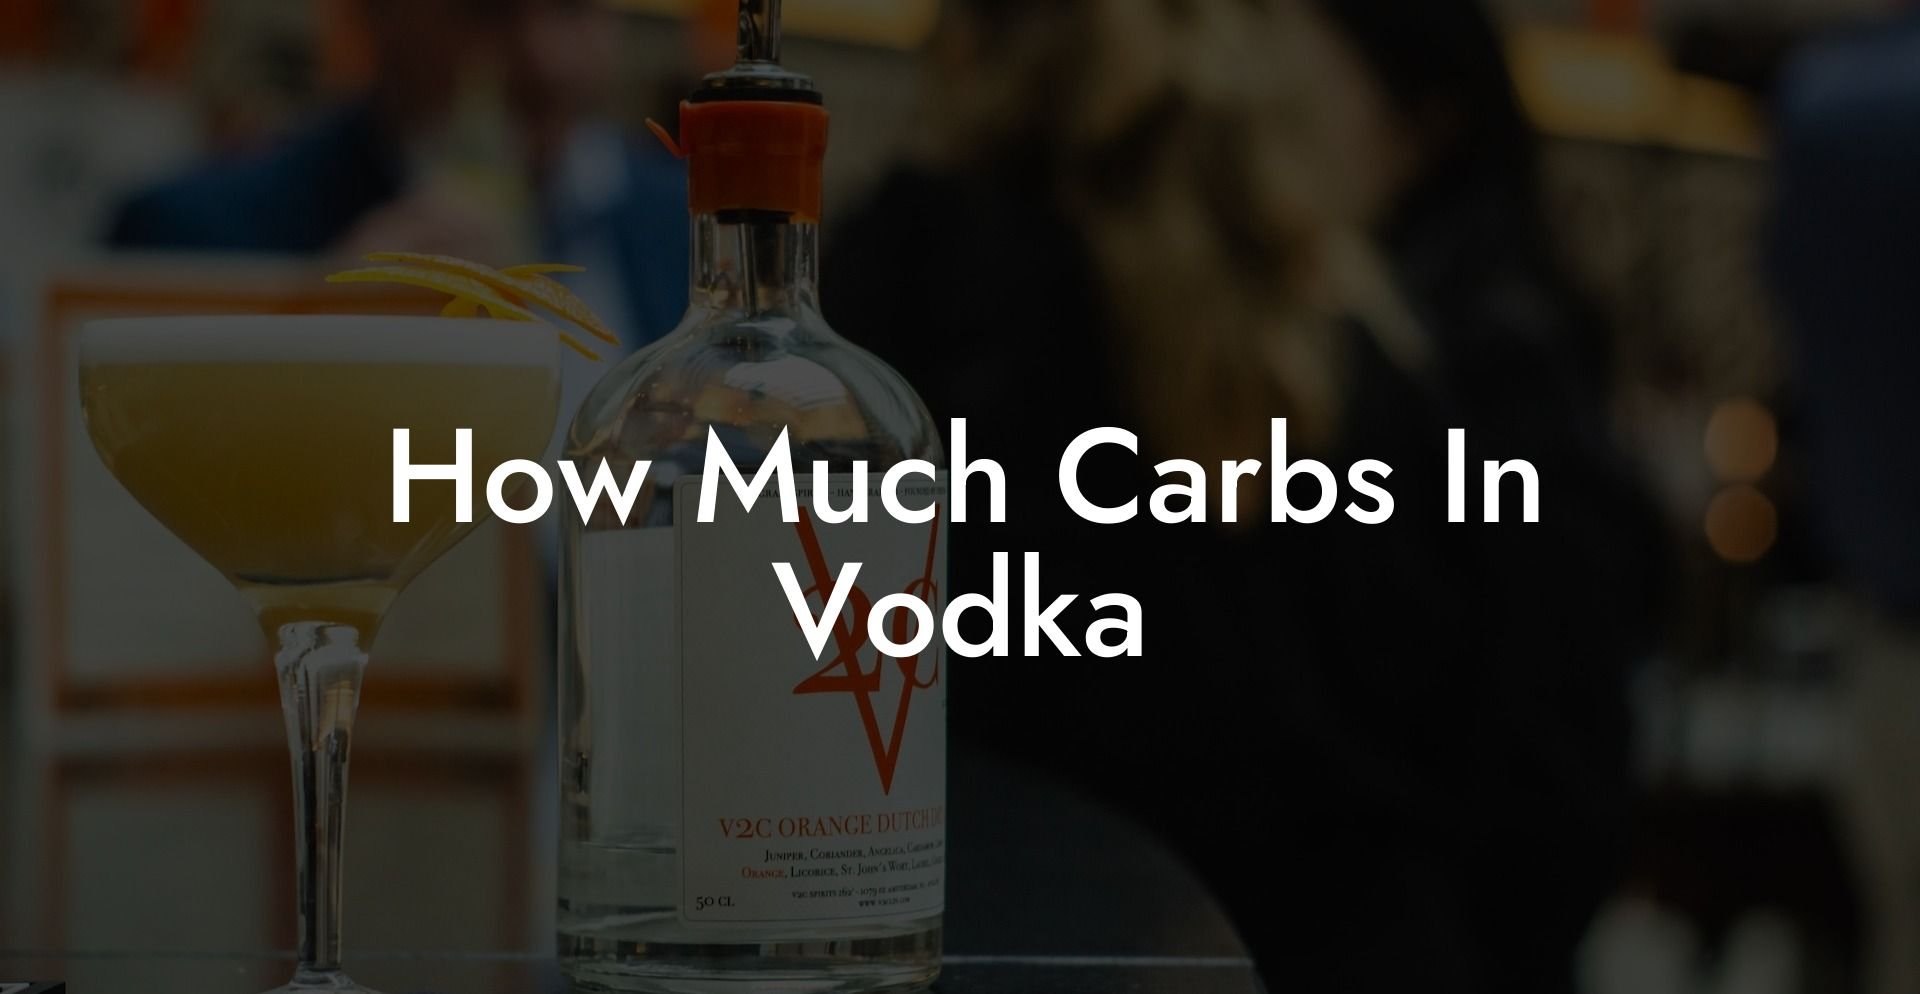 How Much Carbs In Vodka